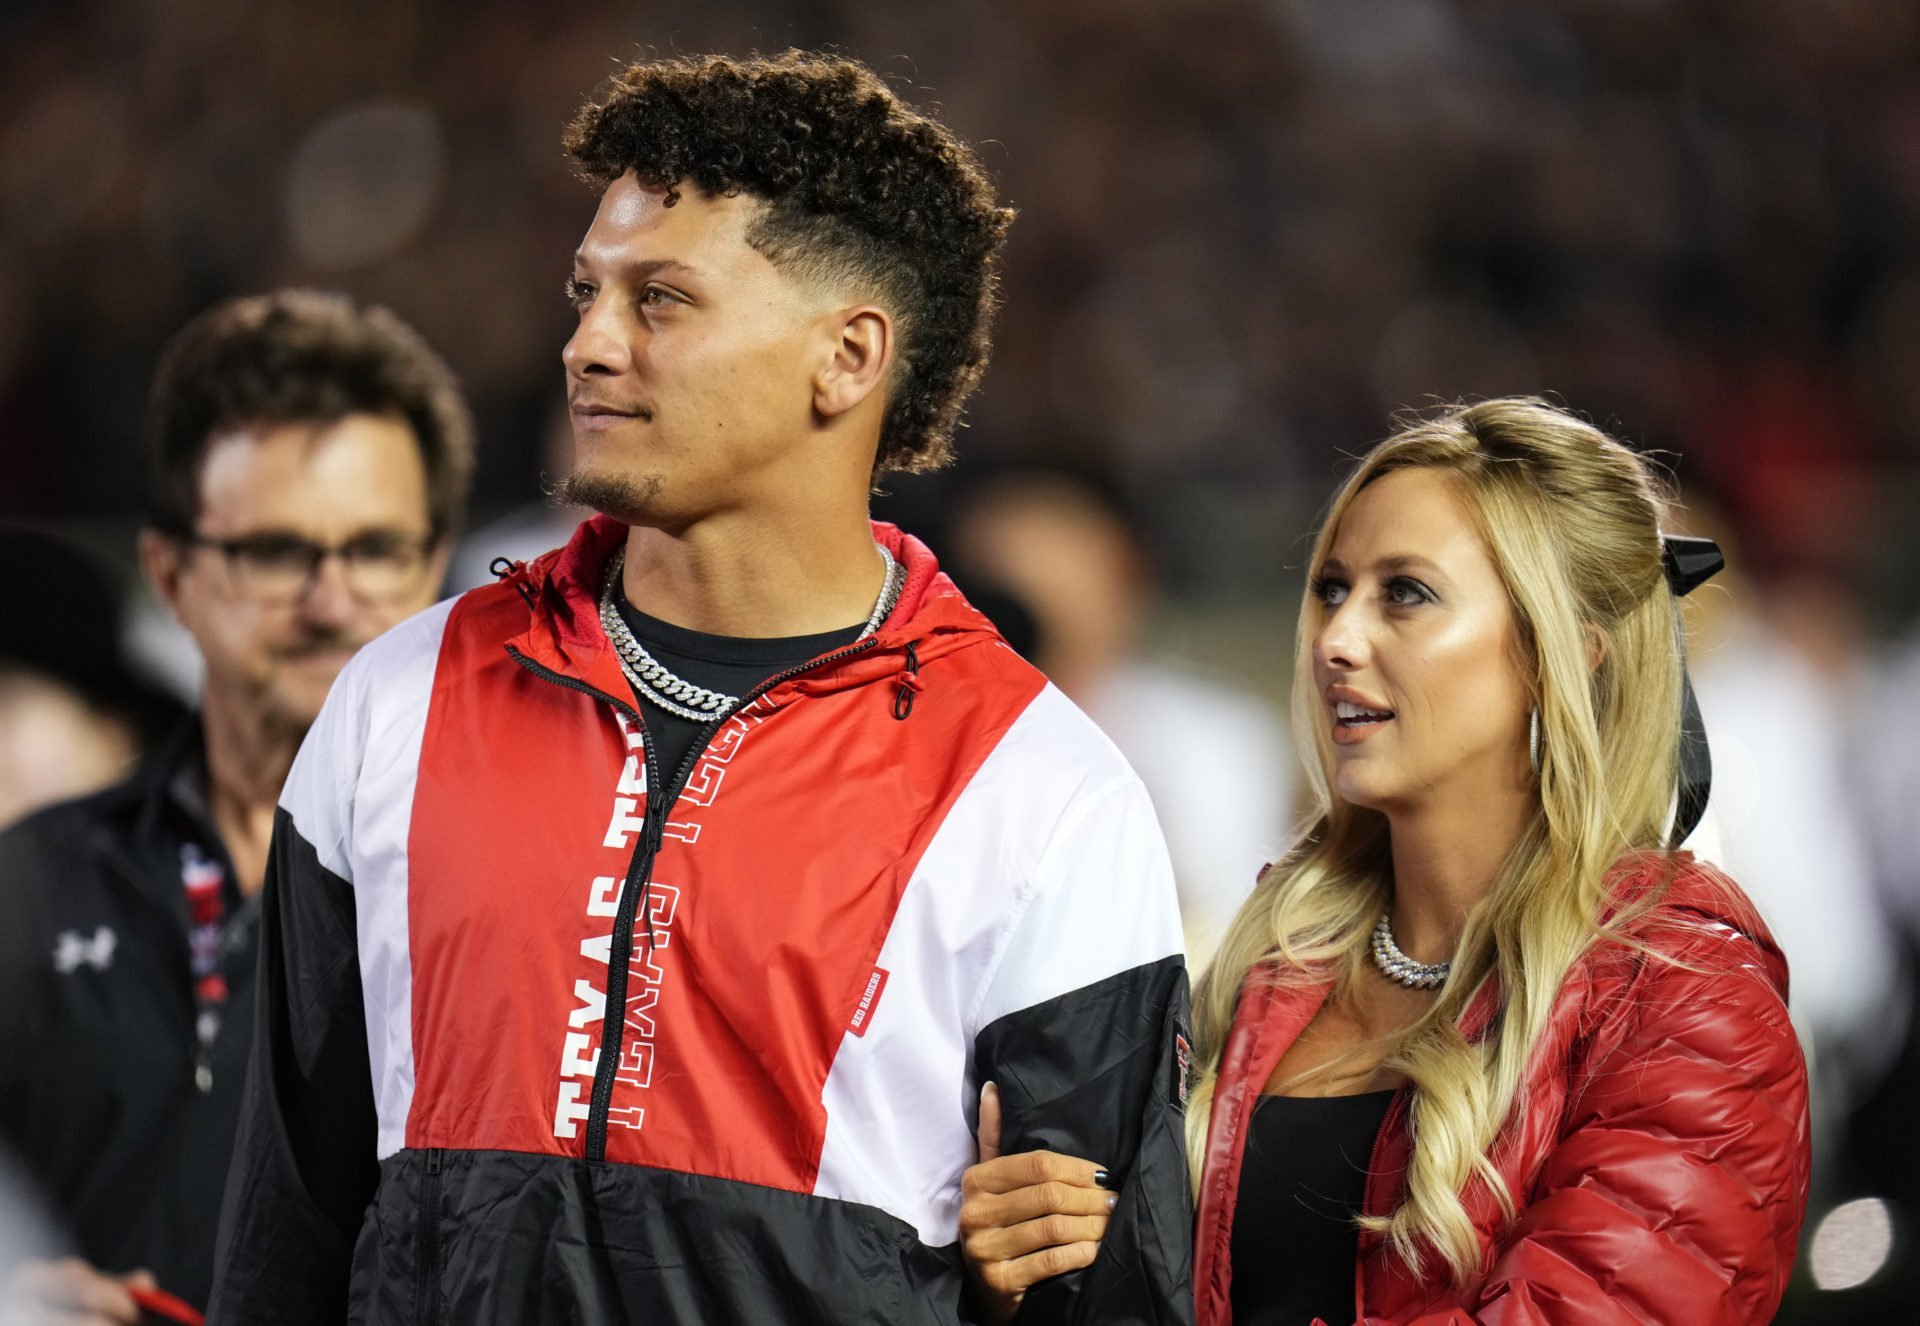 Patrick Mahomes wife's polygamy tattoo sends conspiracy theorists into overdrive